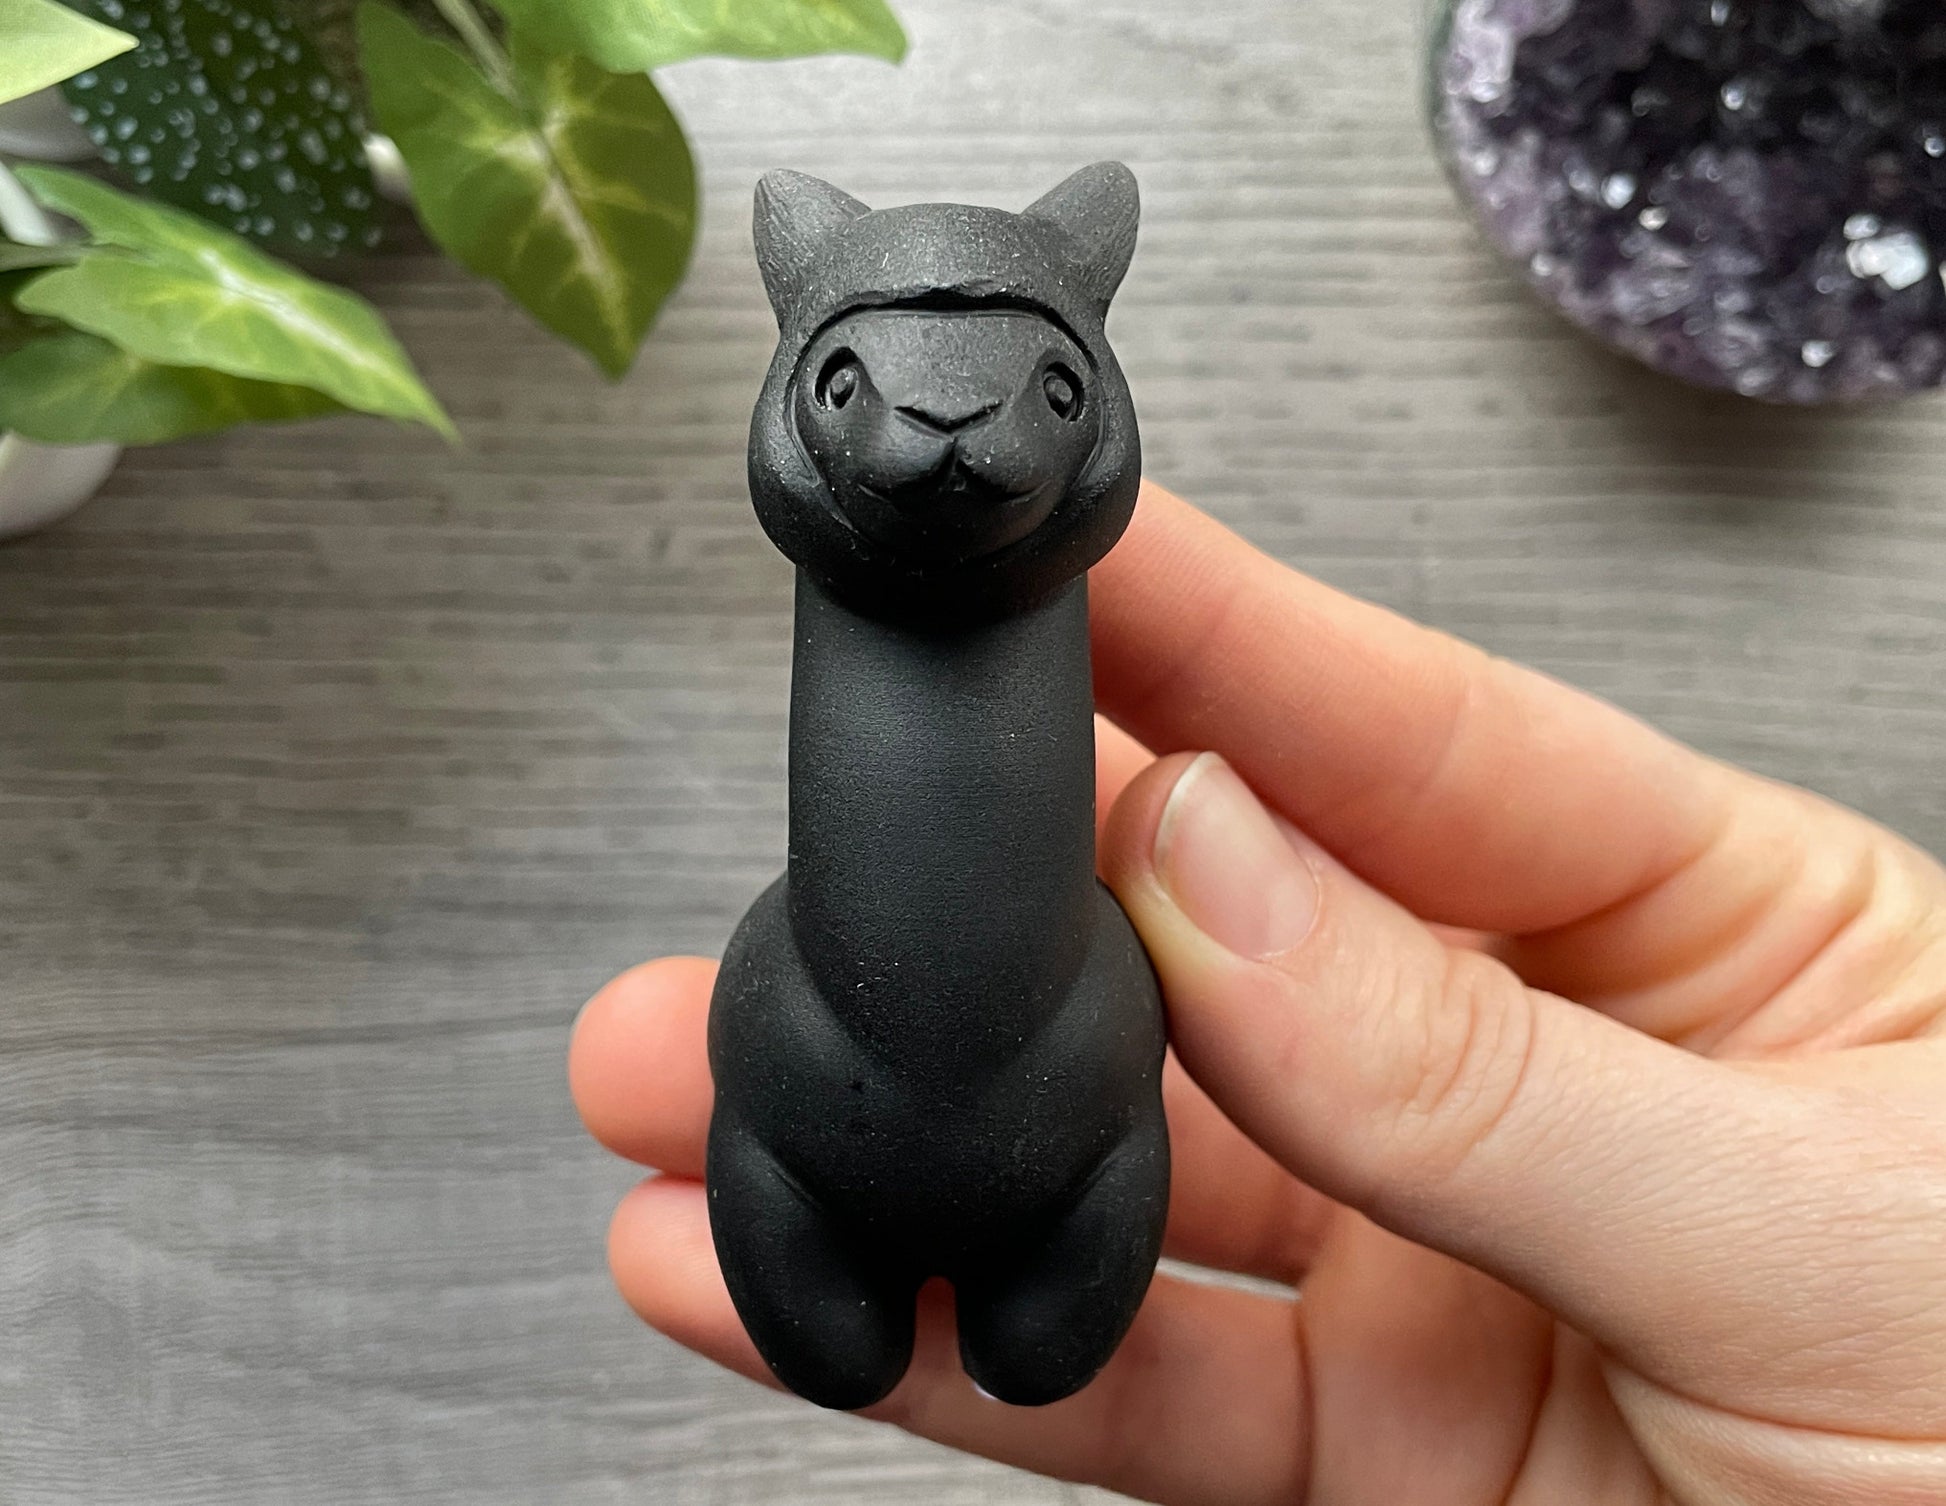 Pictured is a carved black obsidian alpaca or llama.